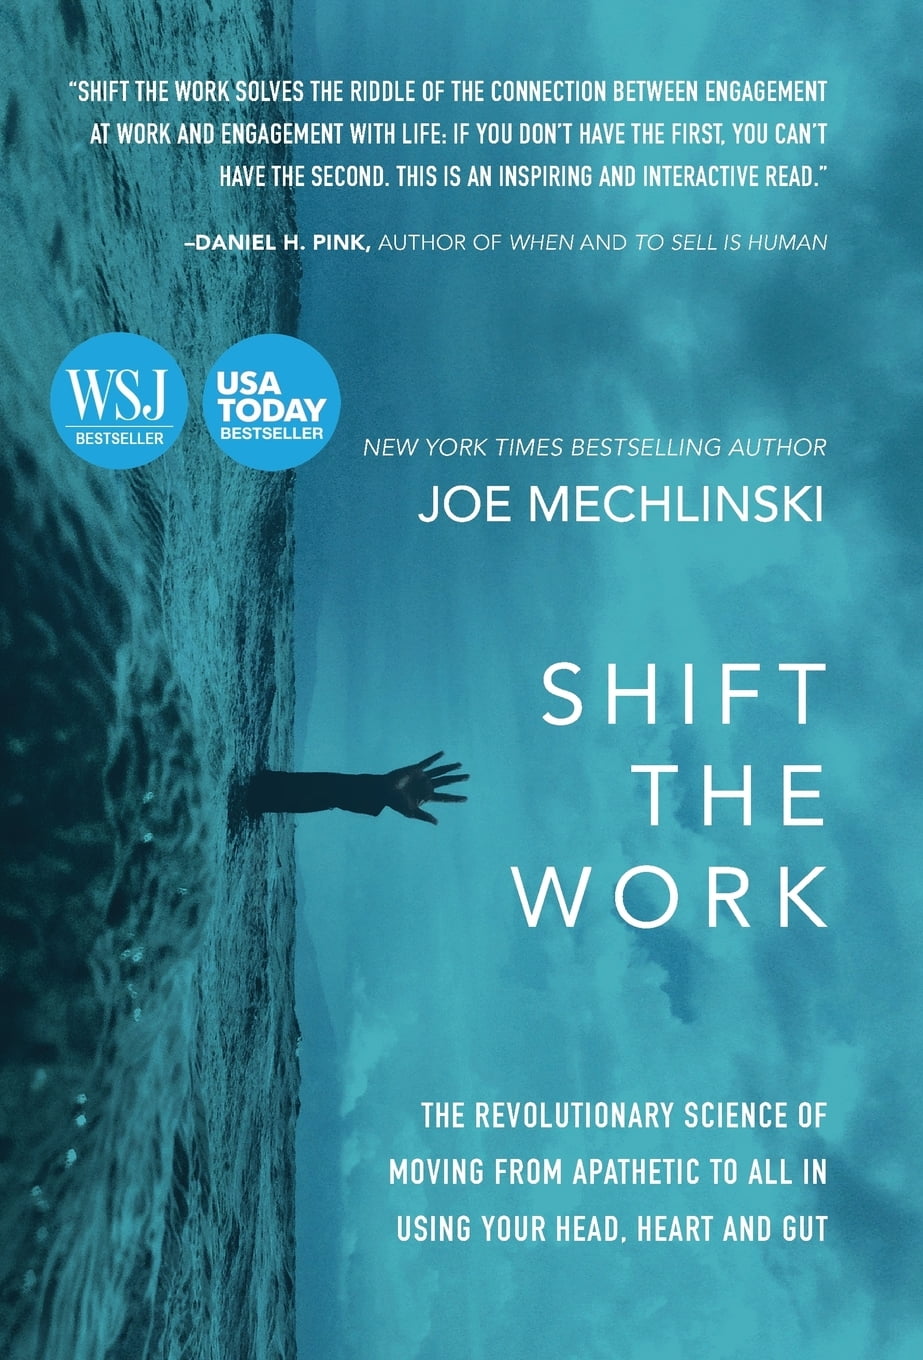 Shift-the-Work-The-Revolutionary-Science-of-Moving-From-Apathetic-to-All-in-Using-Your-Head-Heart-and-Gut